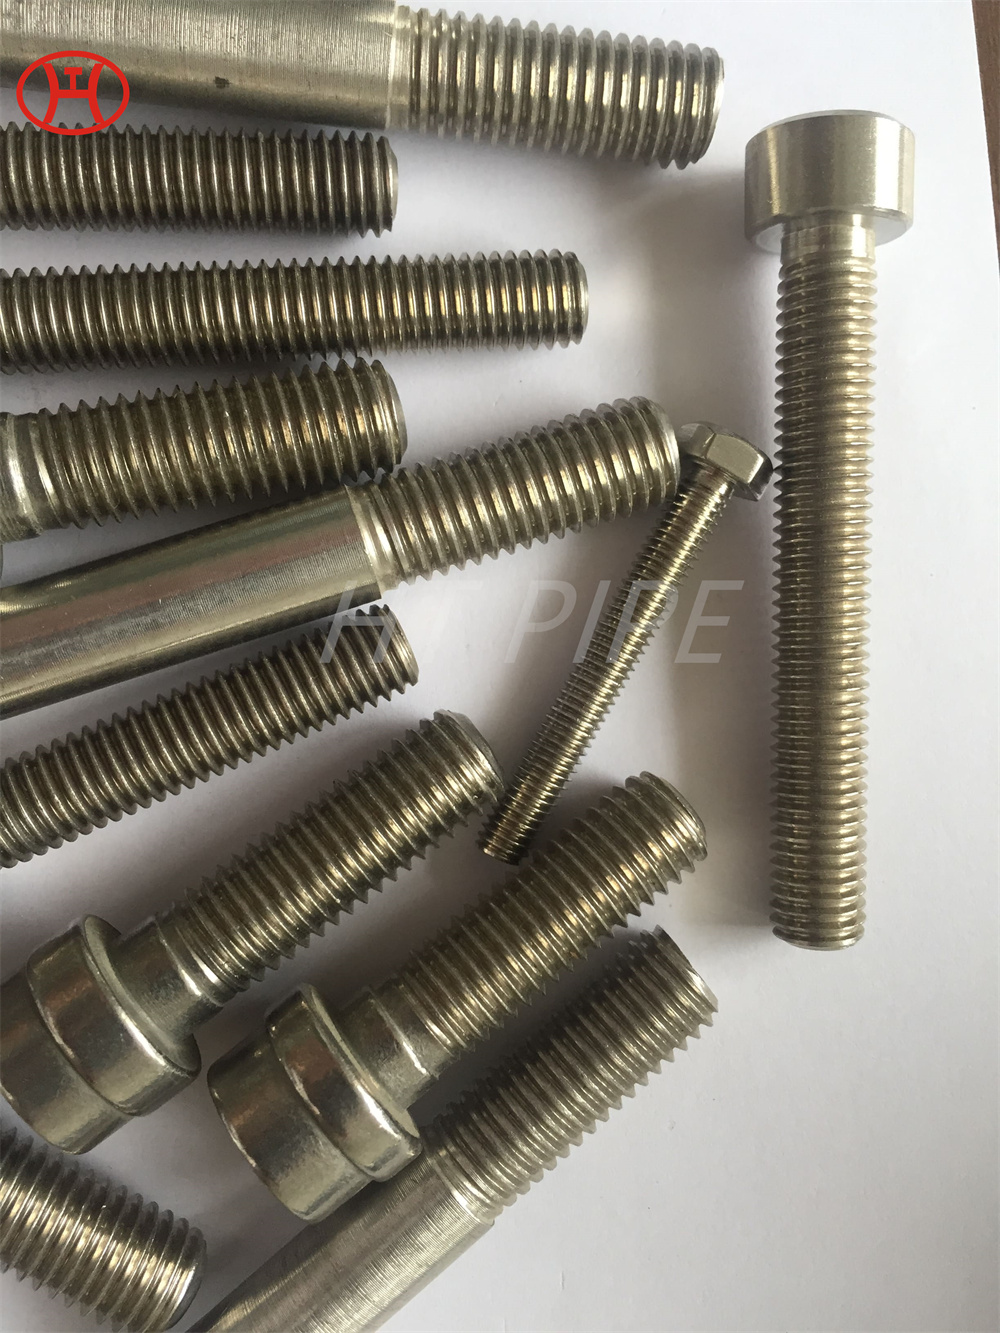 DIN933 DIN931 nickel alloy 2.4816 Alloy 600 Inconel 600 double hex bolt